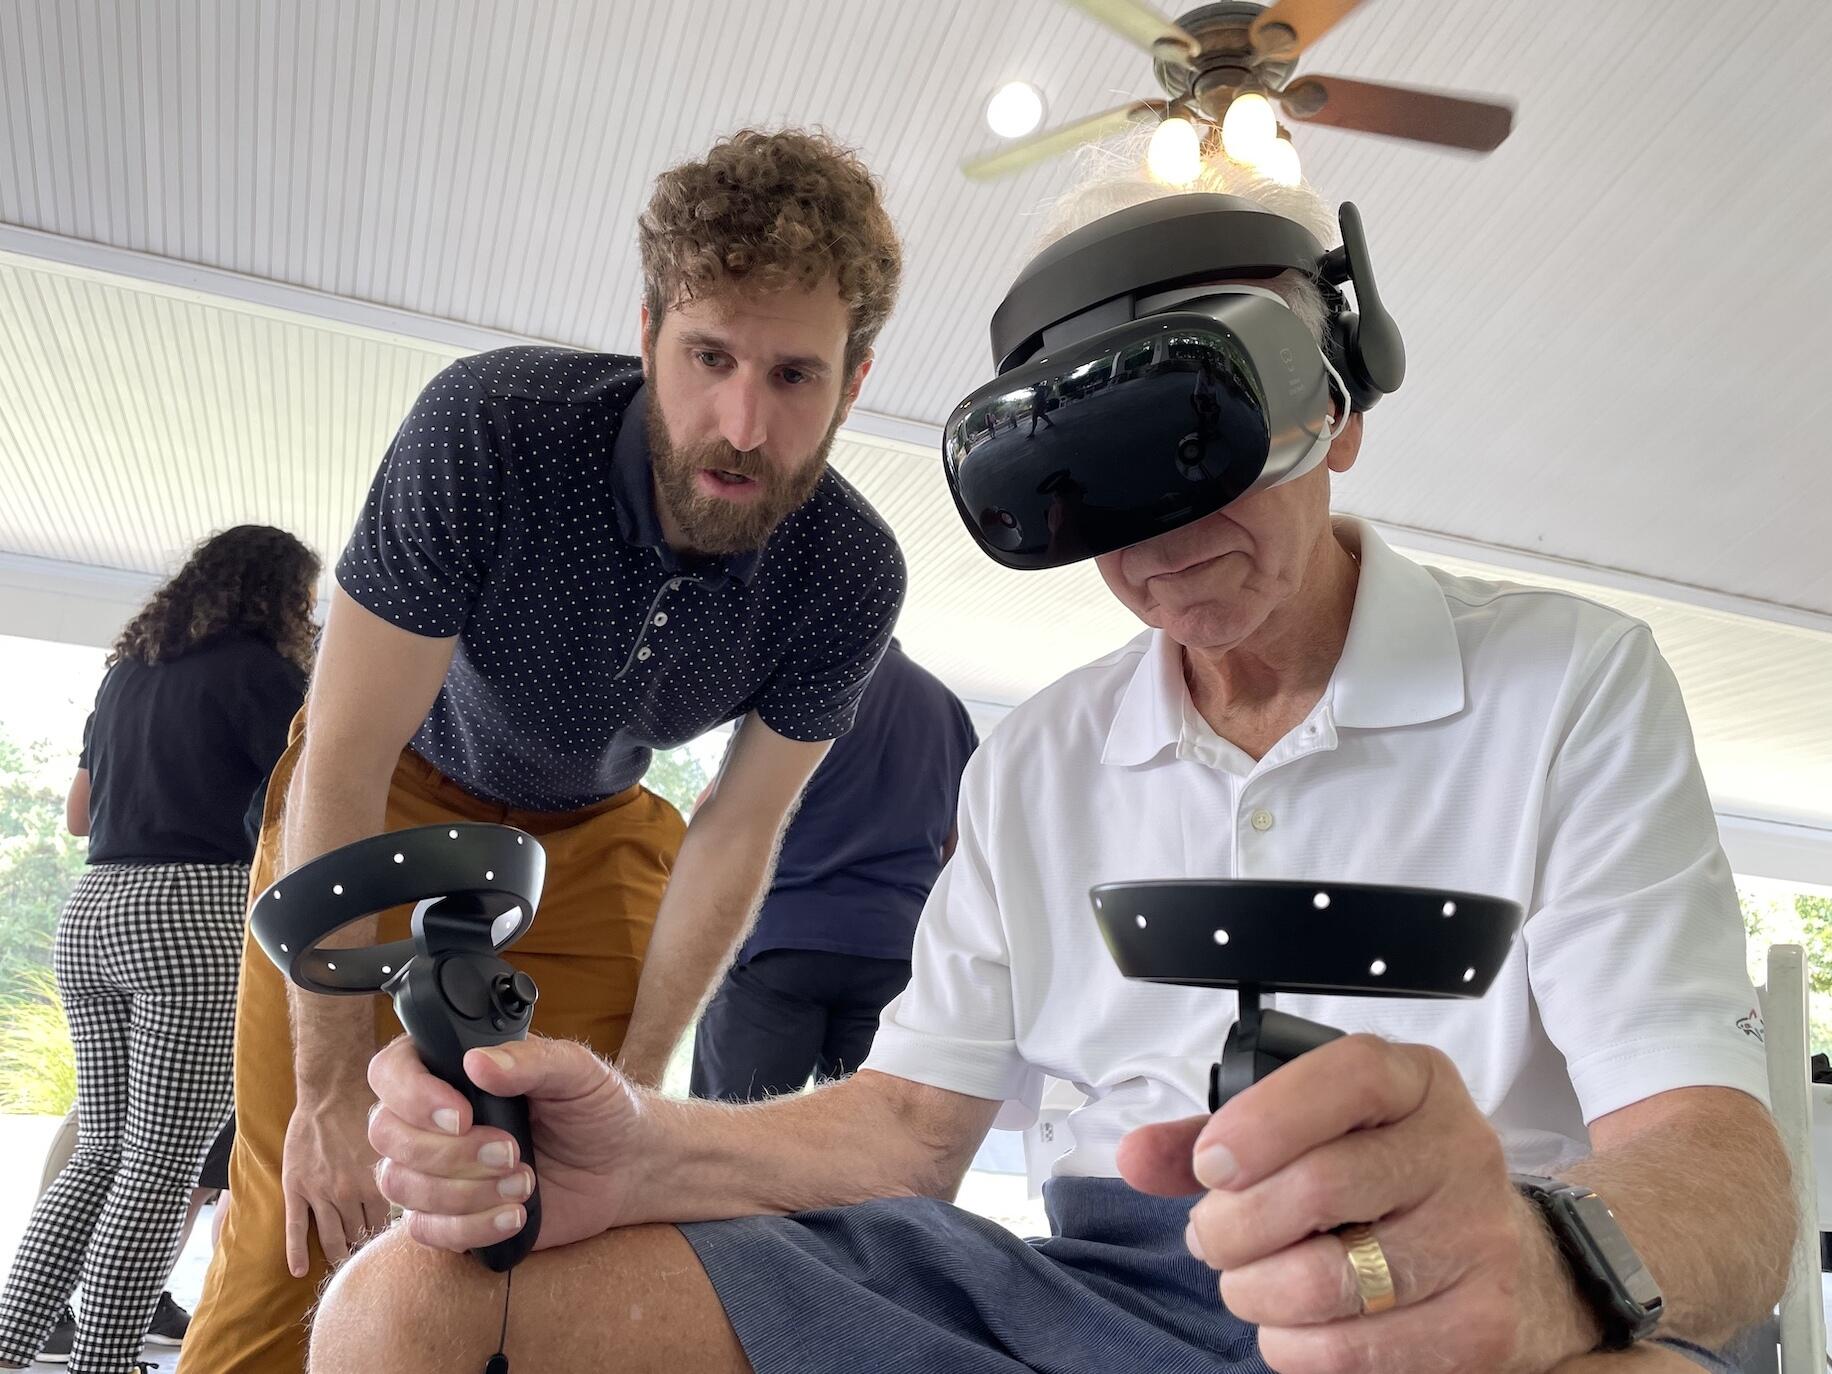 Alexander Stamenkovic, a post-doctoral fellow in the Motor Control Lab, assists Ray Birk as Birk uses a VR headset and hand controls.